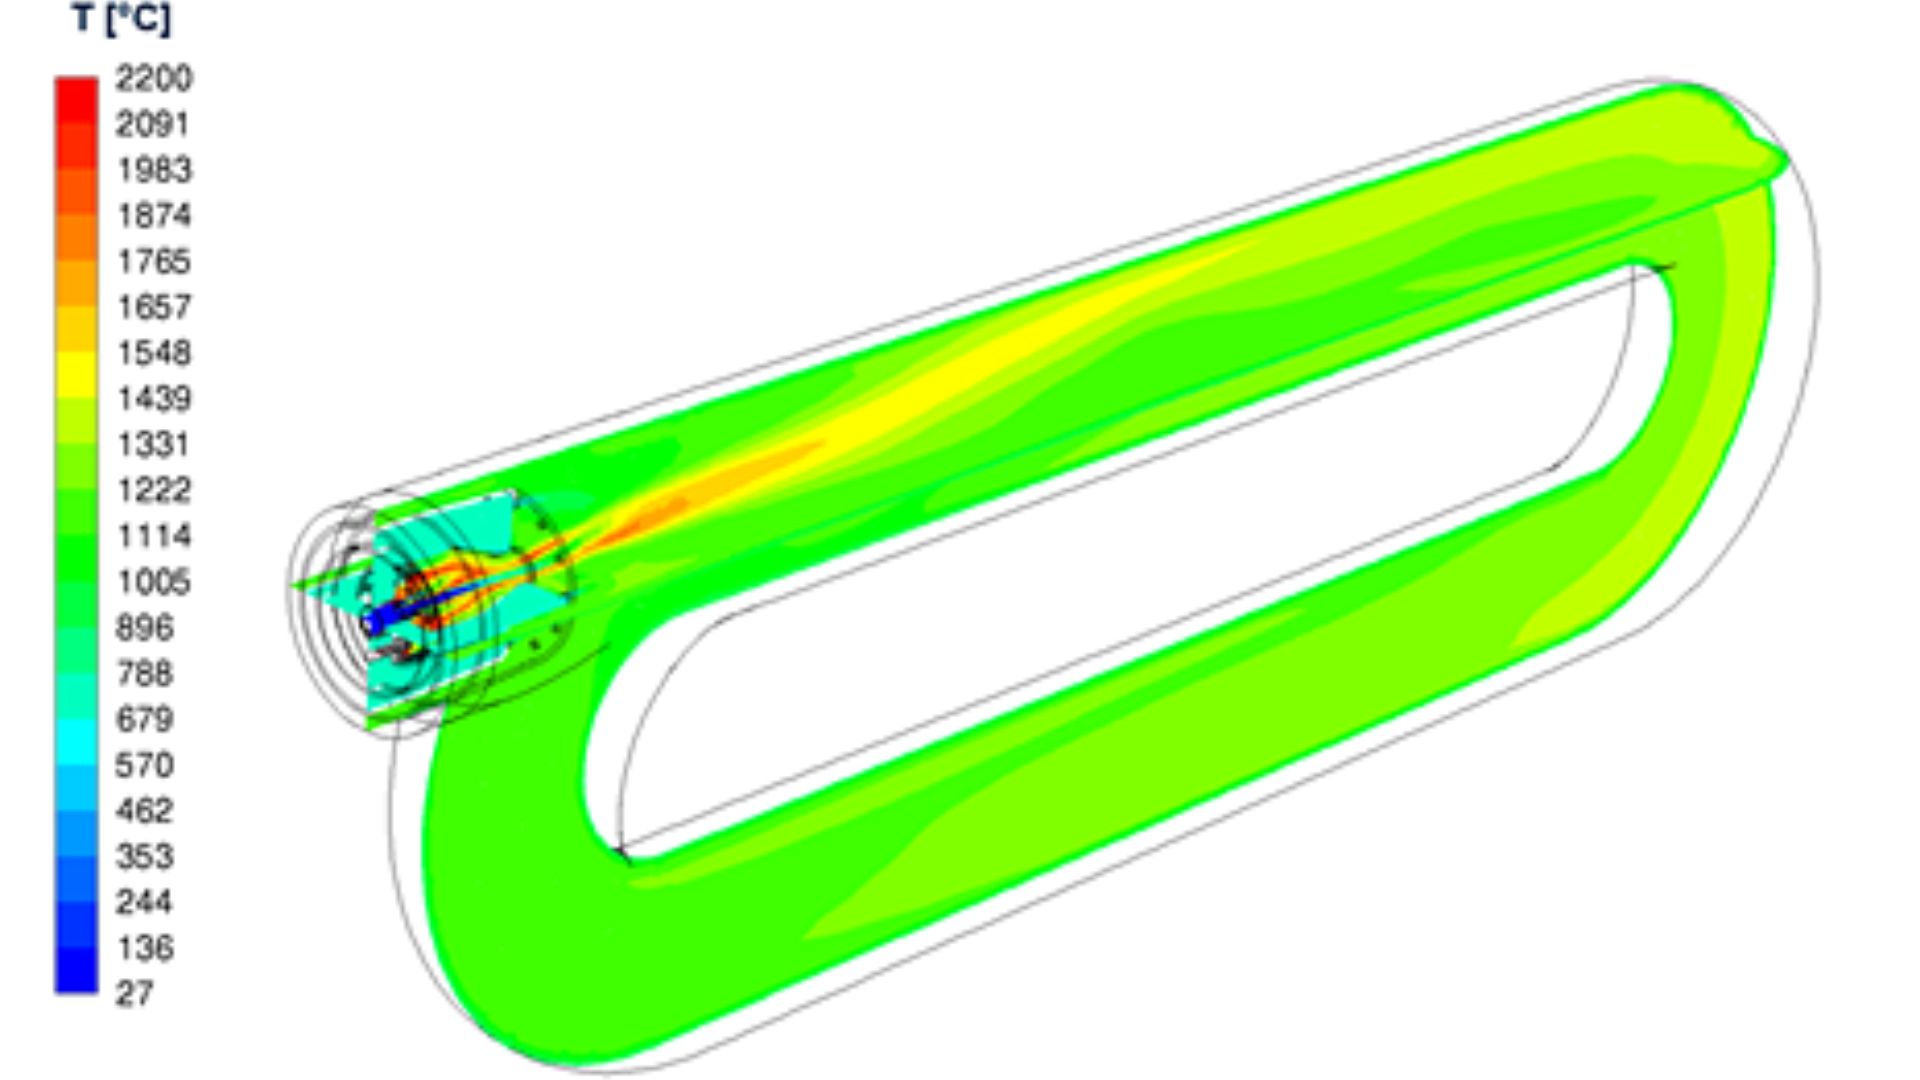 CFD simulation of a TRKS burner in a P-shaped radiant tube showing the temperature distribution inside the tube.